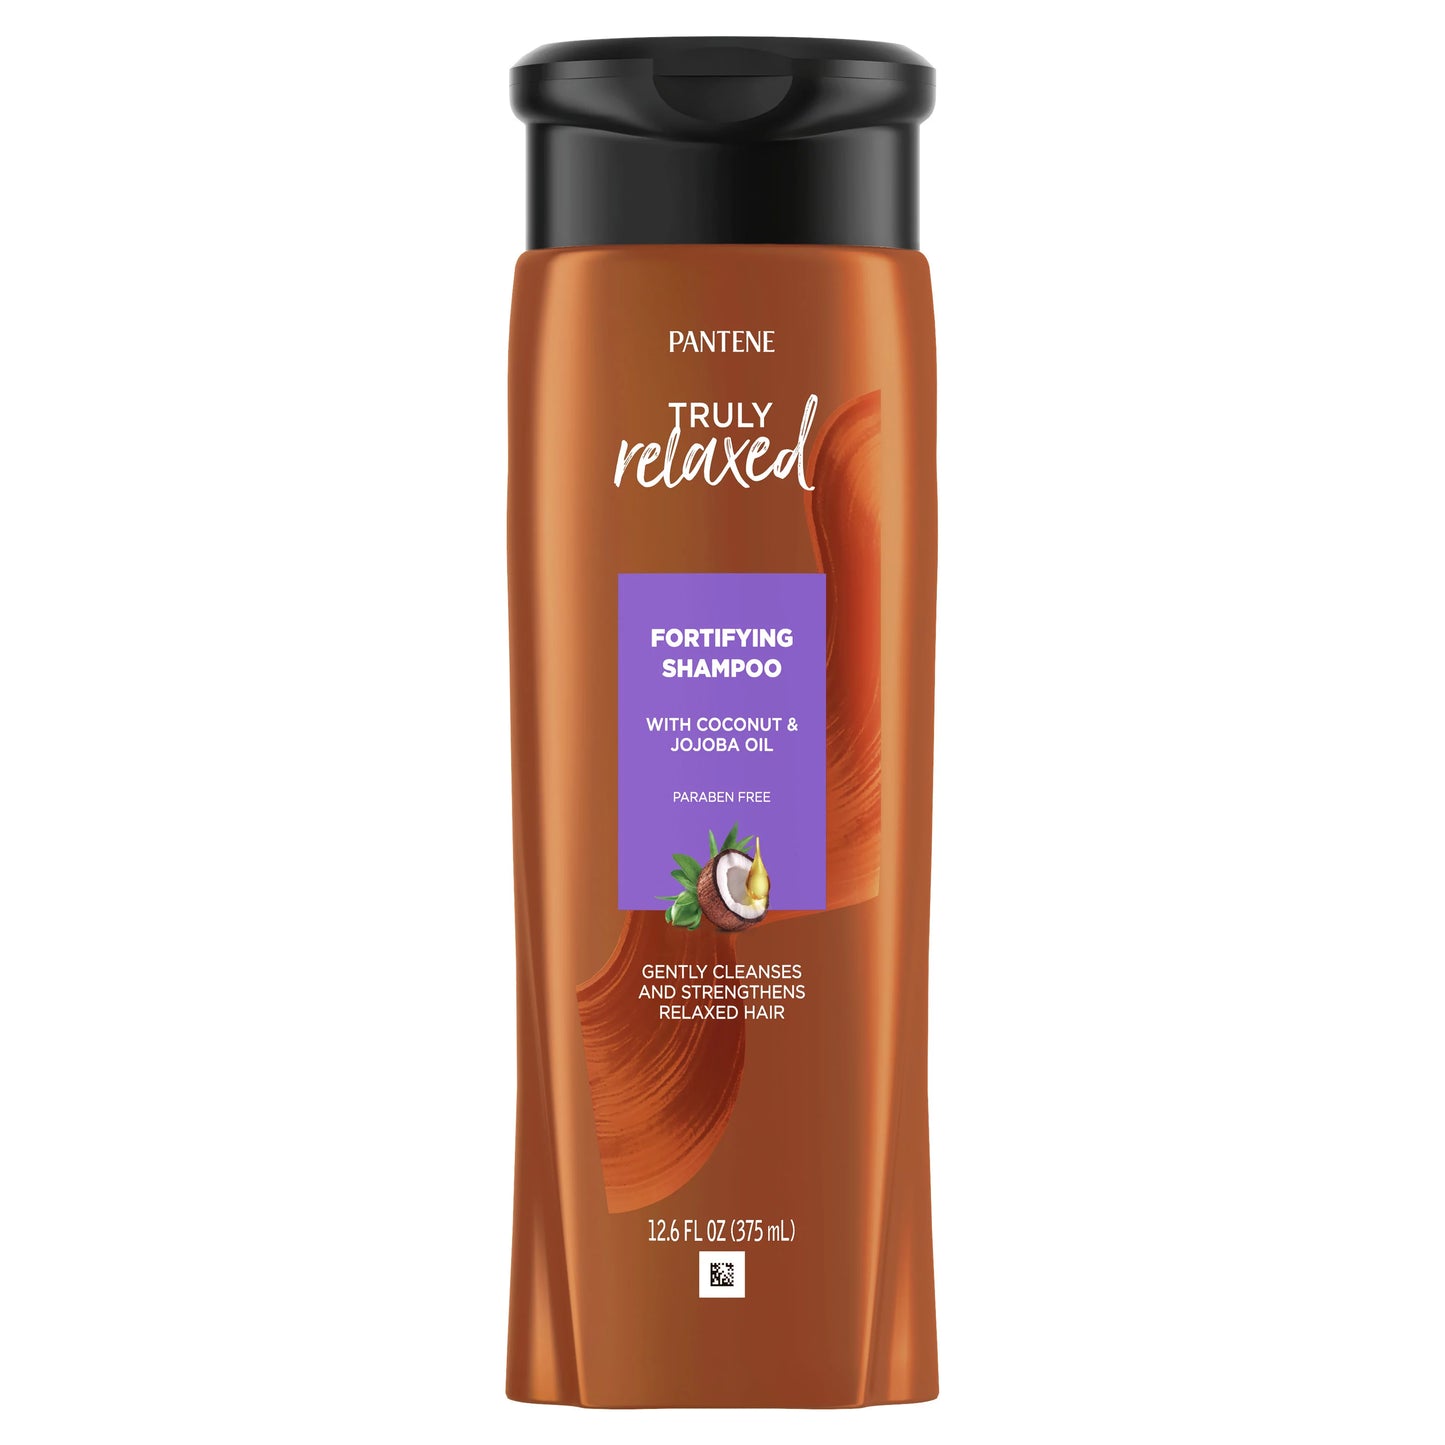 PANTENE TRULY RELAXED FORTIFYING SHAMPOO WITH COCONUT & JOJOBA OIL 12.6OZ